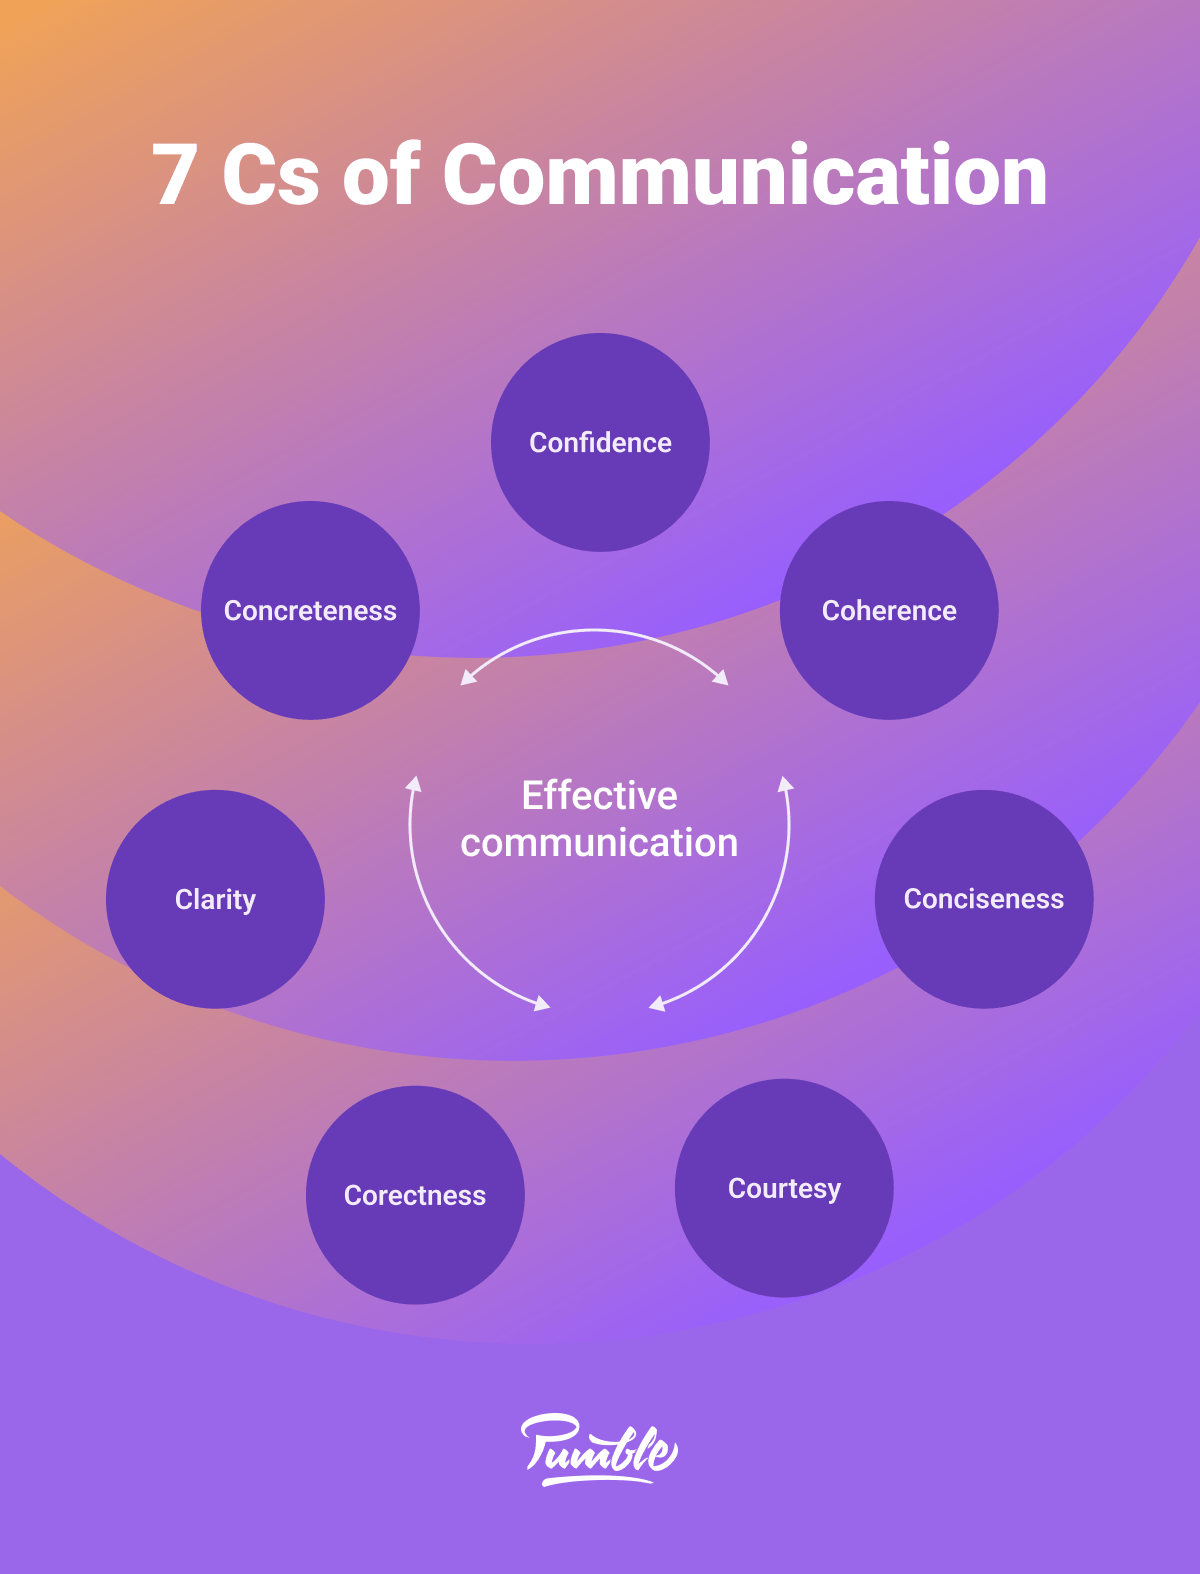 Effective communication: Definition, examples, and tips